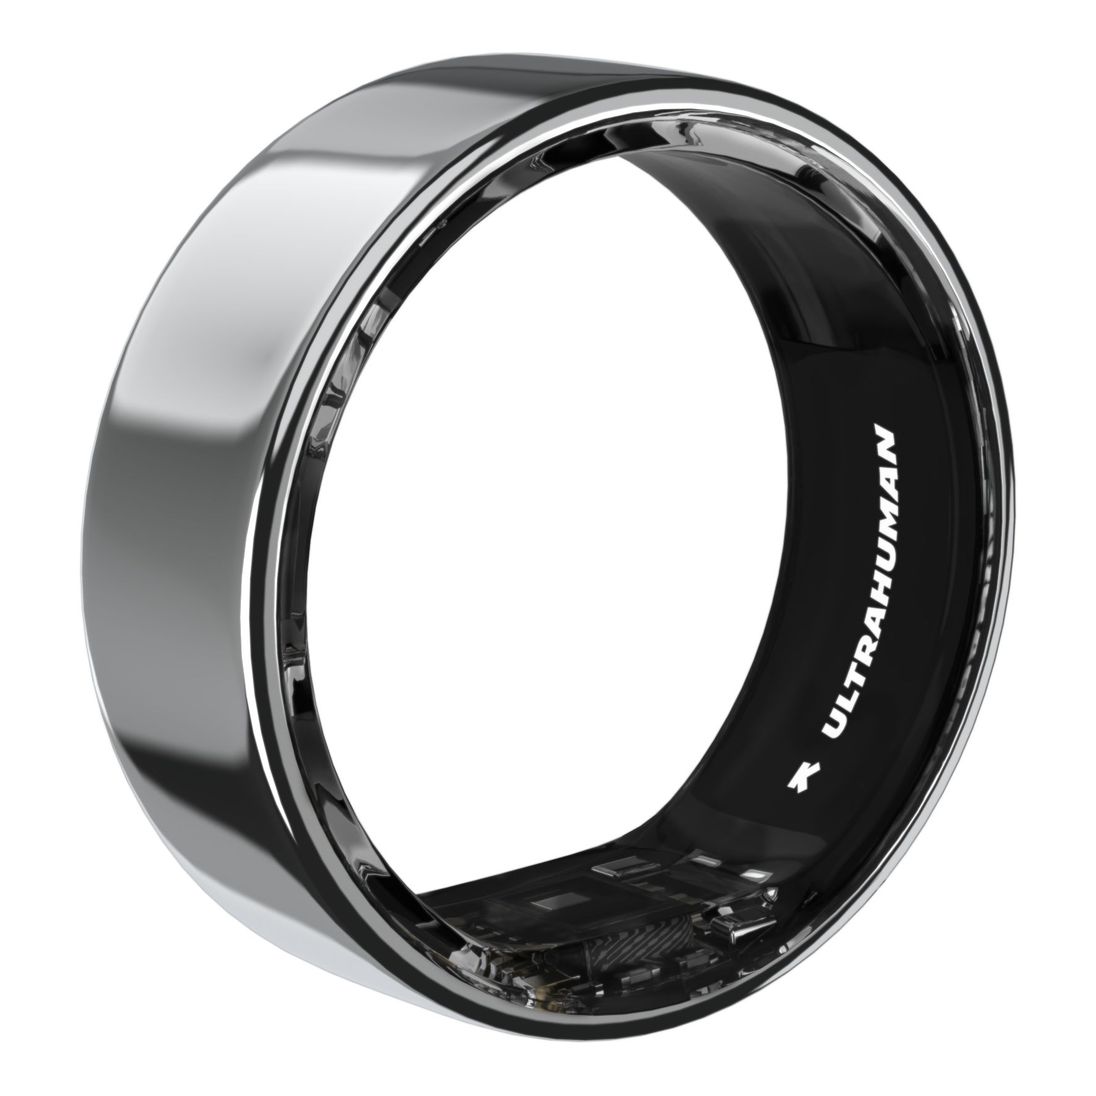 Ultrahuman Ring AIR Smart Ring - Size 7 - Space Silver